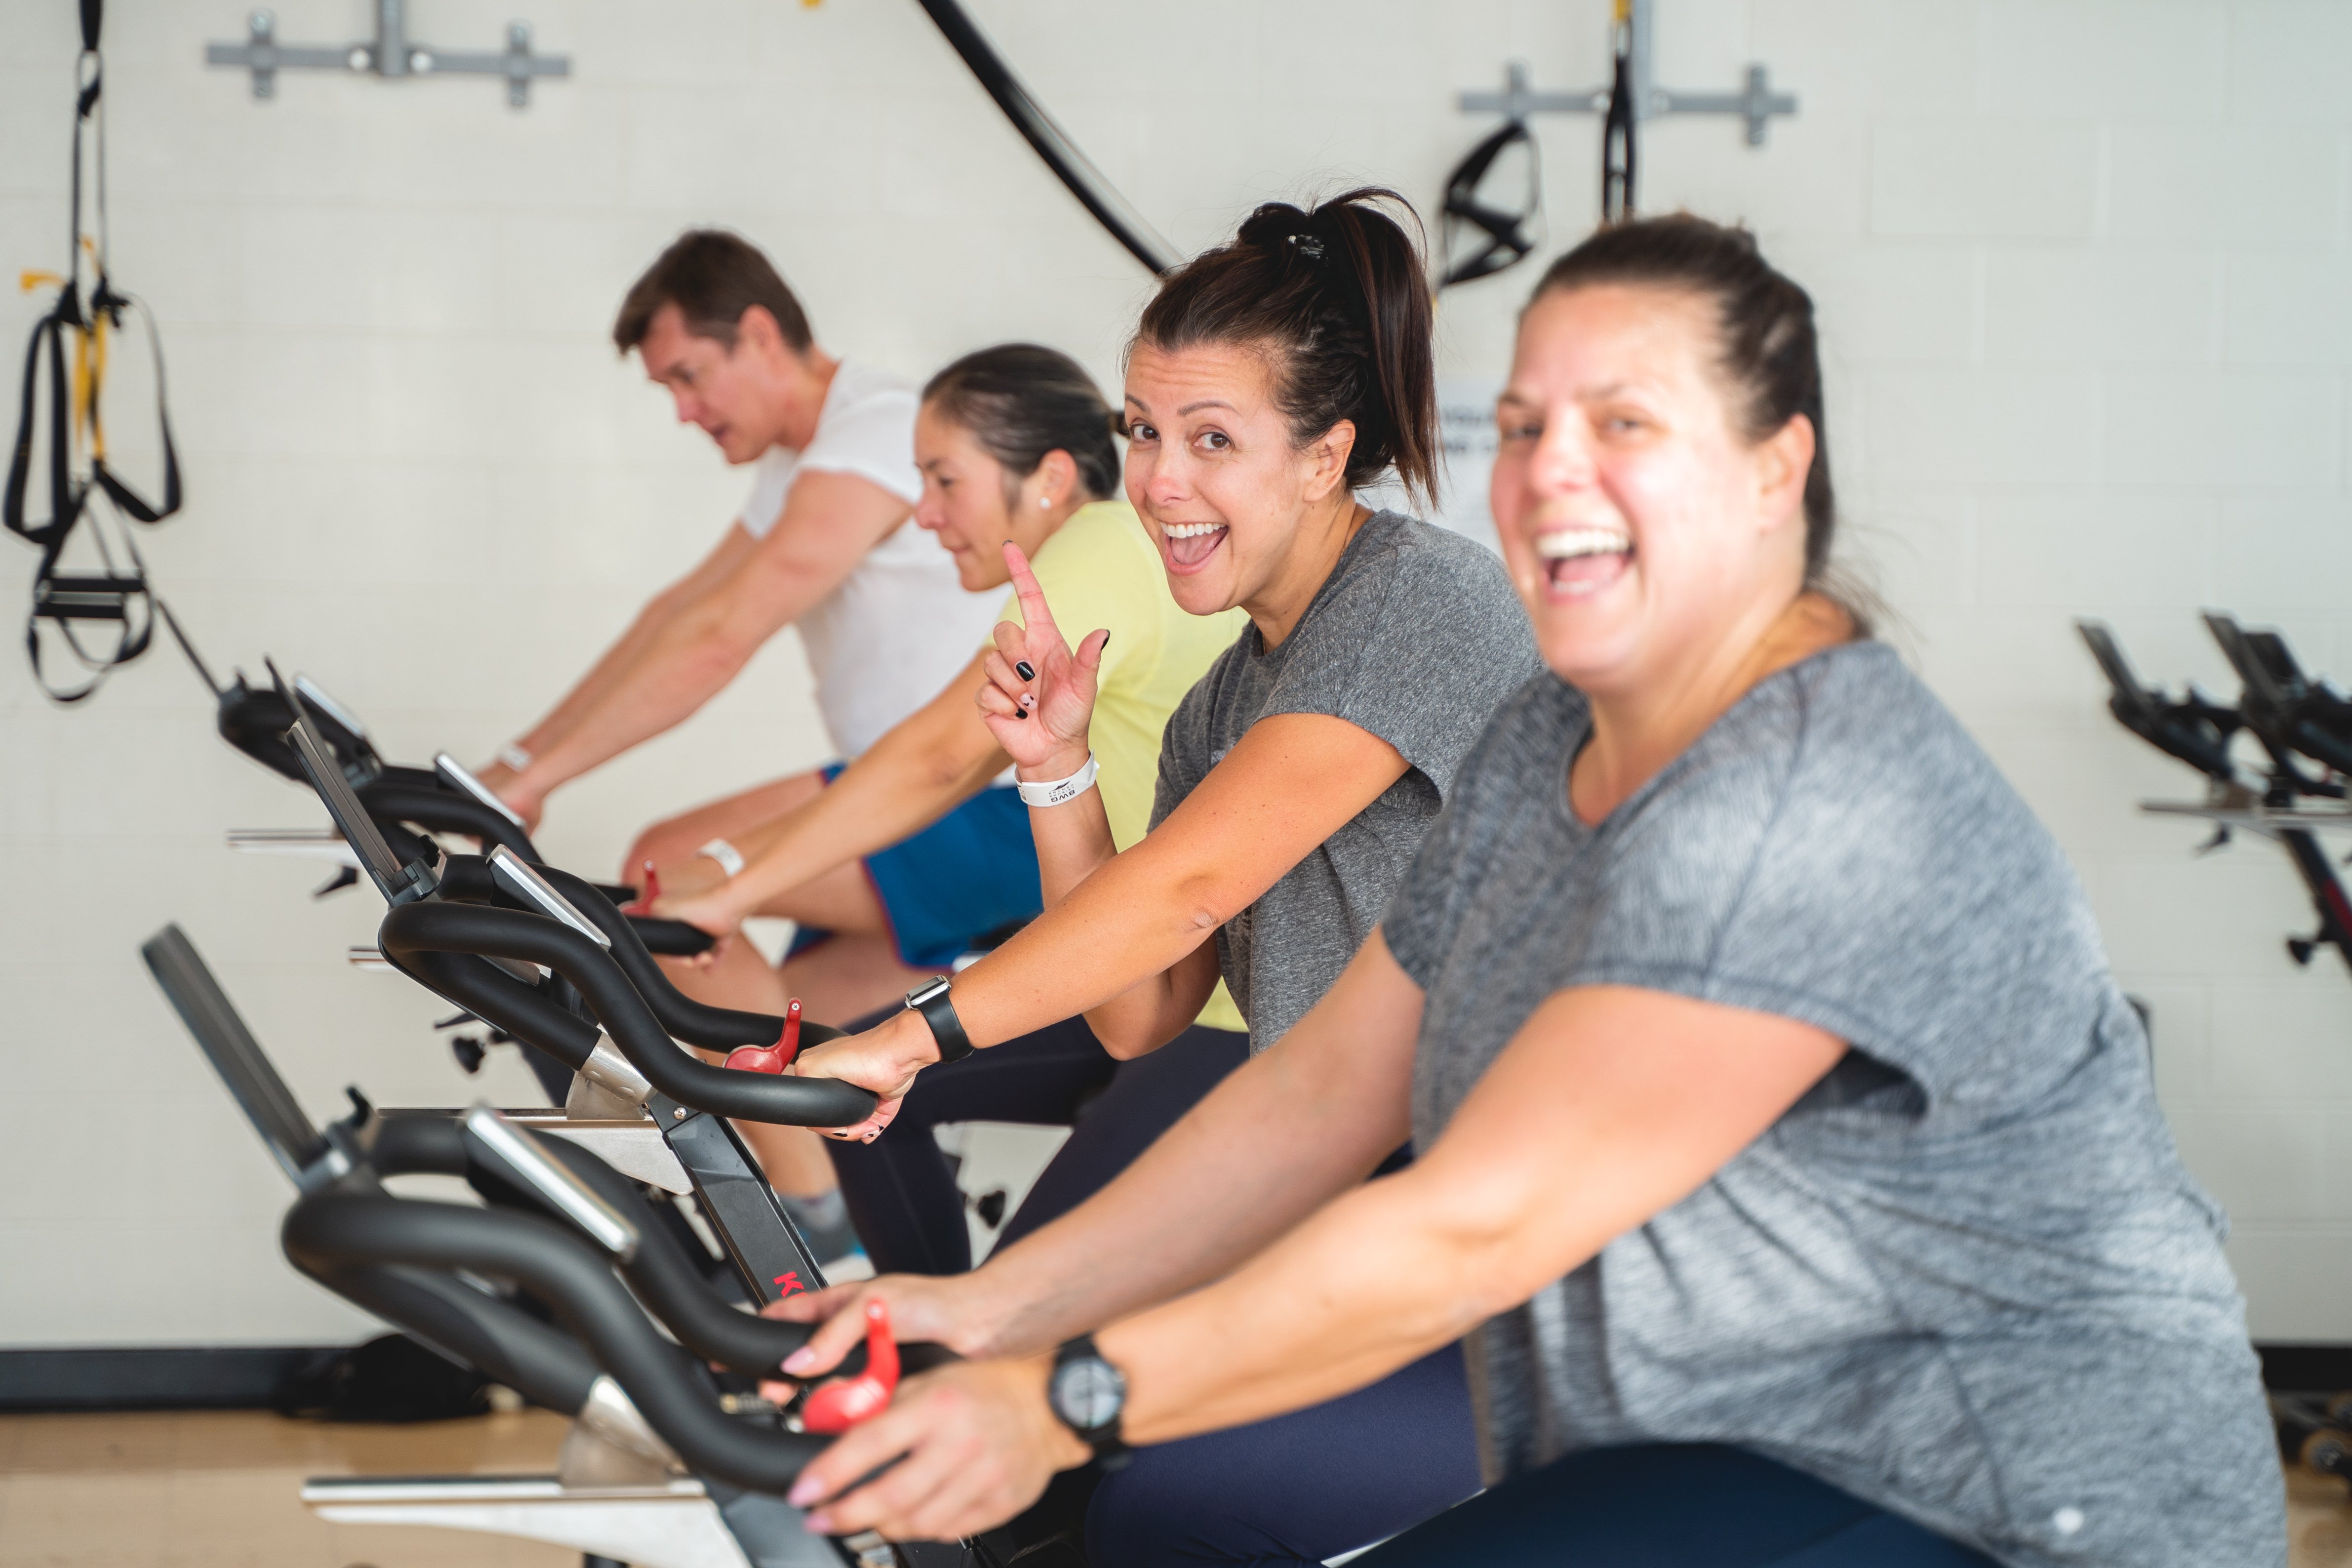 Participants smiling while in a spin class